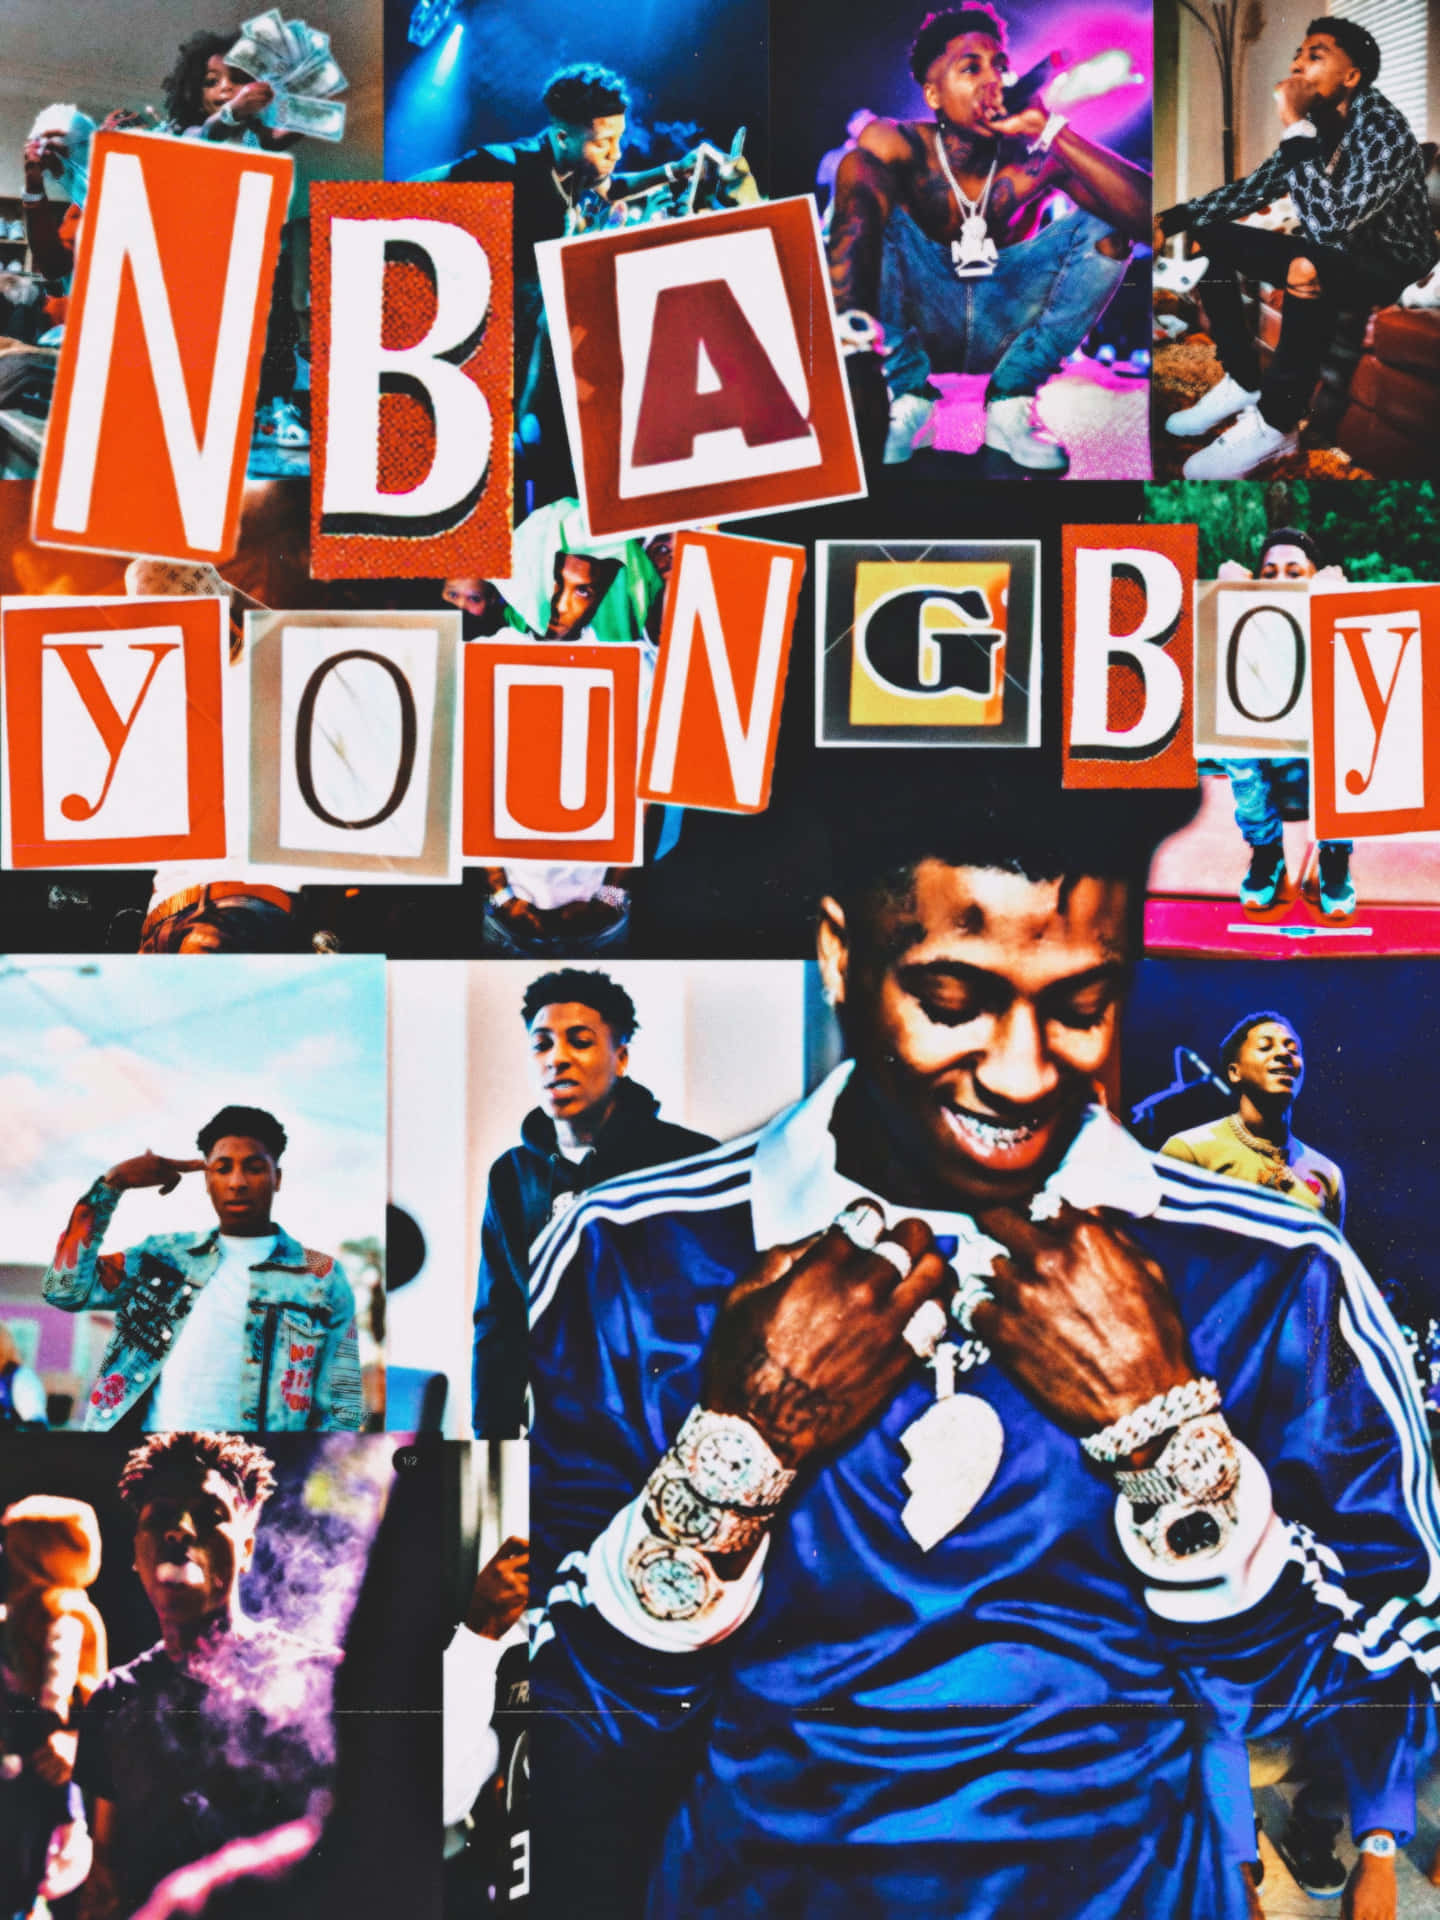 Nba Youngboy Performing Live On Stage